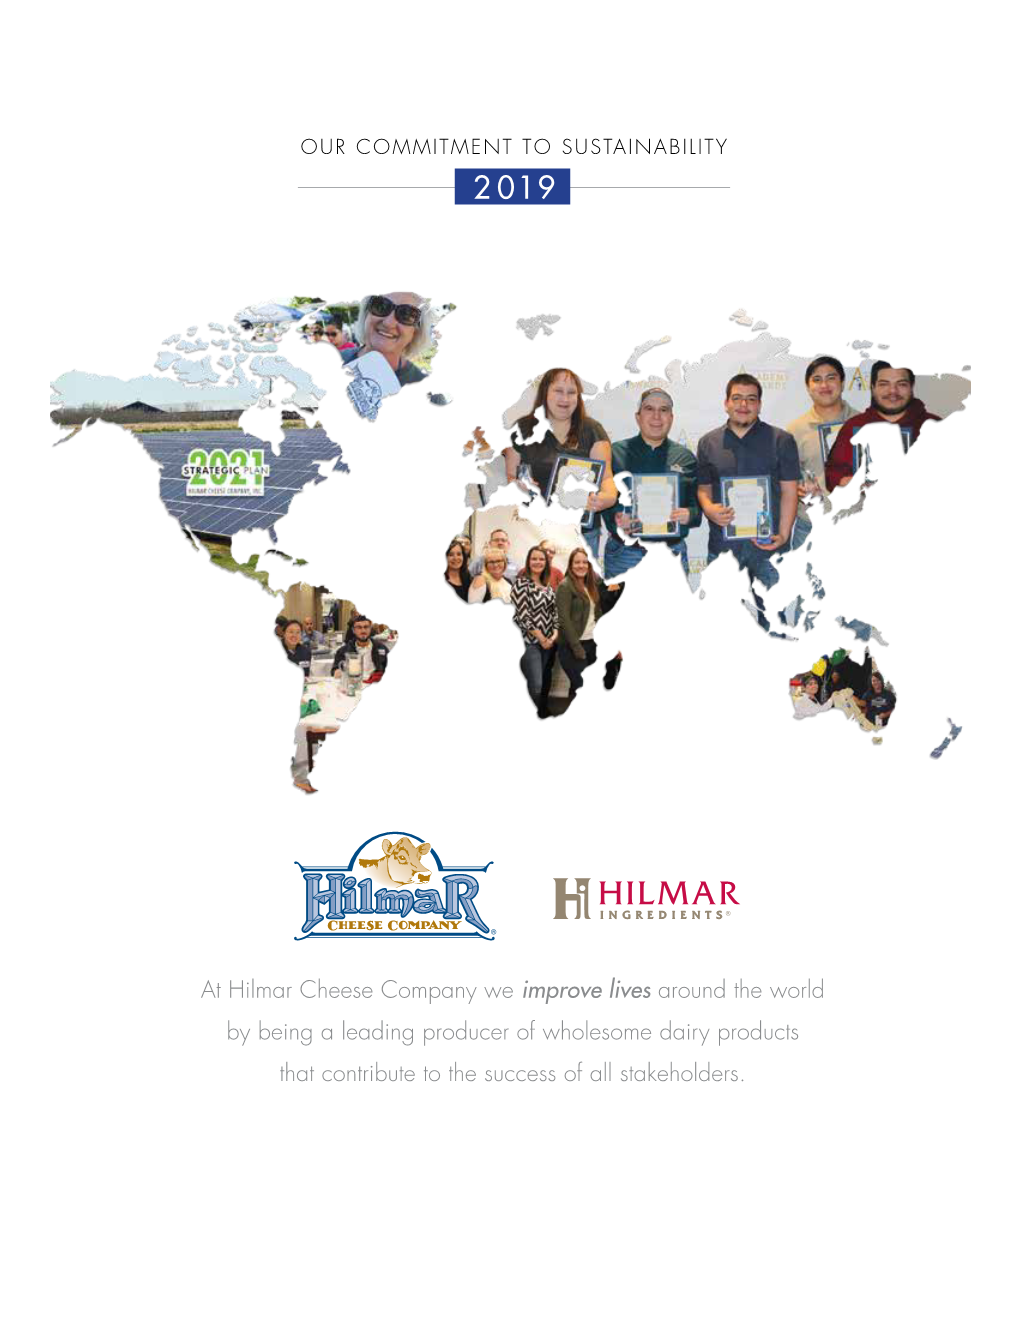 At Hilmar Cheese Company We Improve Lives Around the World by Being a Leading Producer of Wholesome Dairy Products That Contribute to the Success of All Stakeholders